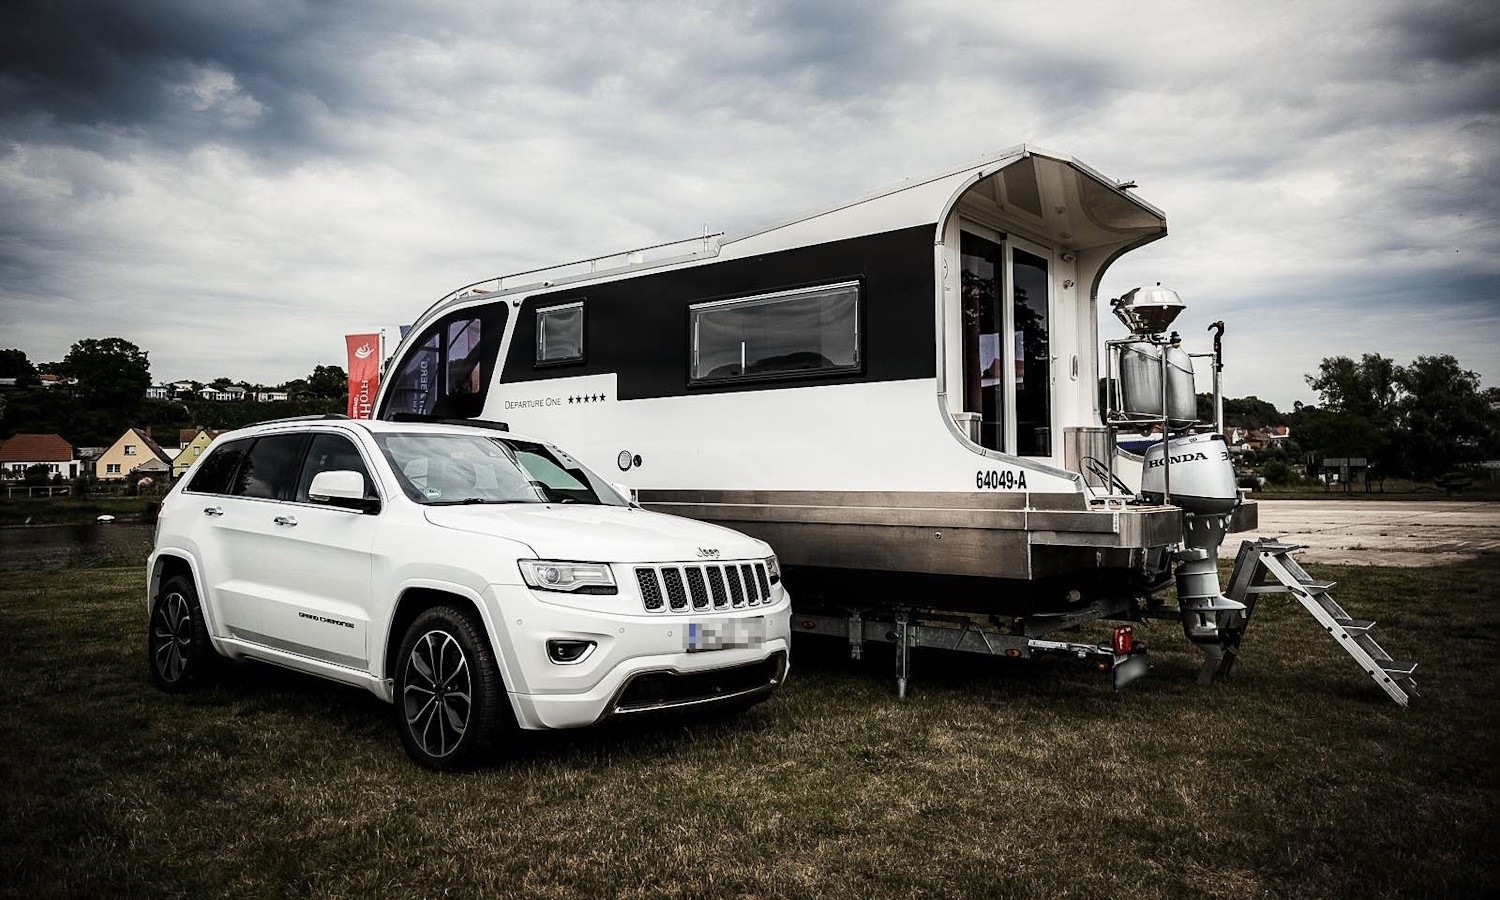 caravanboat departure one is a luxury travel trailer that doubles as a houseboat 6